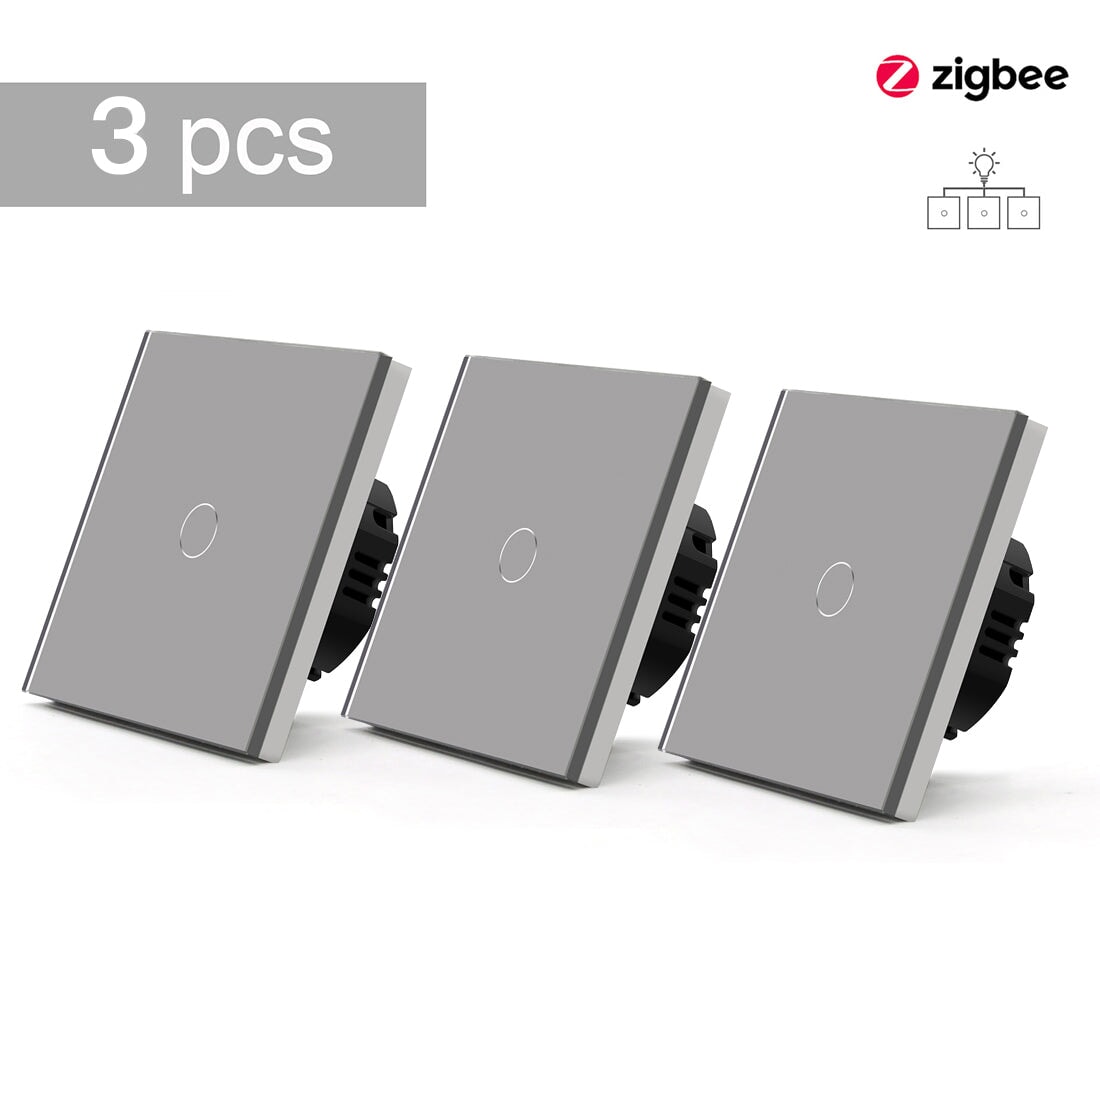 BSEED Zigbee Single Live Line Switch 1/2/3 Gang 1/2/3 Way Wall Smart Light Switch Single Live Line 1/2/3 pack Light Switches Bseedswitch Grey 1Gang 3 Pcs/Pack